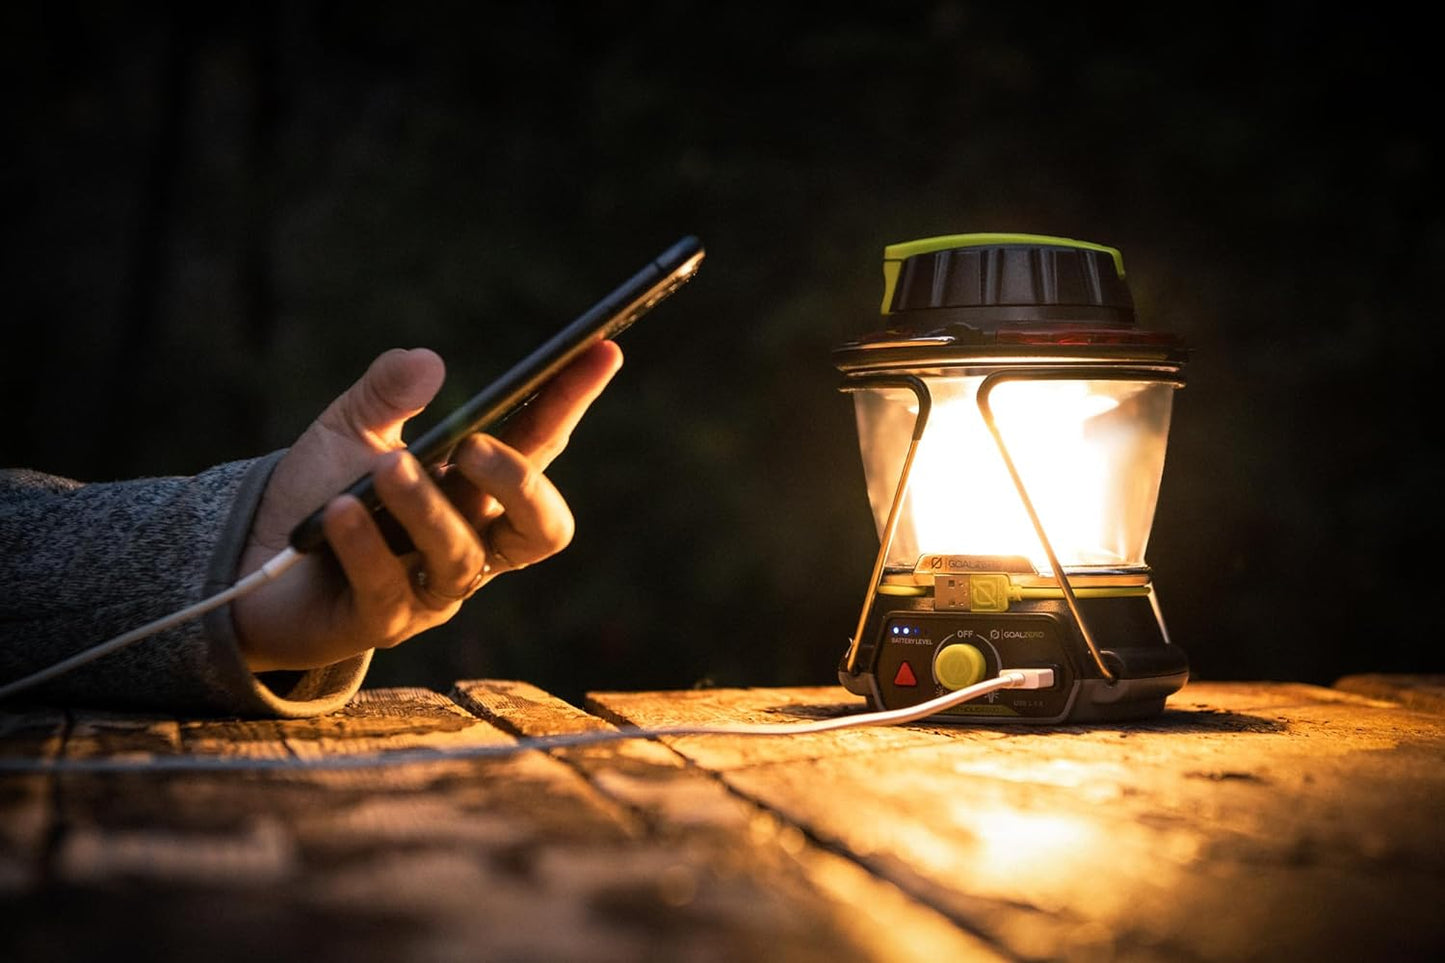 Lighthouse 600 Multi Functional Adjustable Light Perfect for Camping, Outdoor Events, or Emergency use 600 Lumens USB Charging of Phones and Small USB Devices and Long-Lasting Lithium Battery.